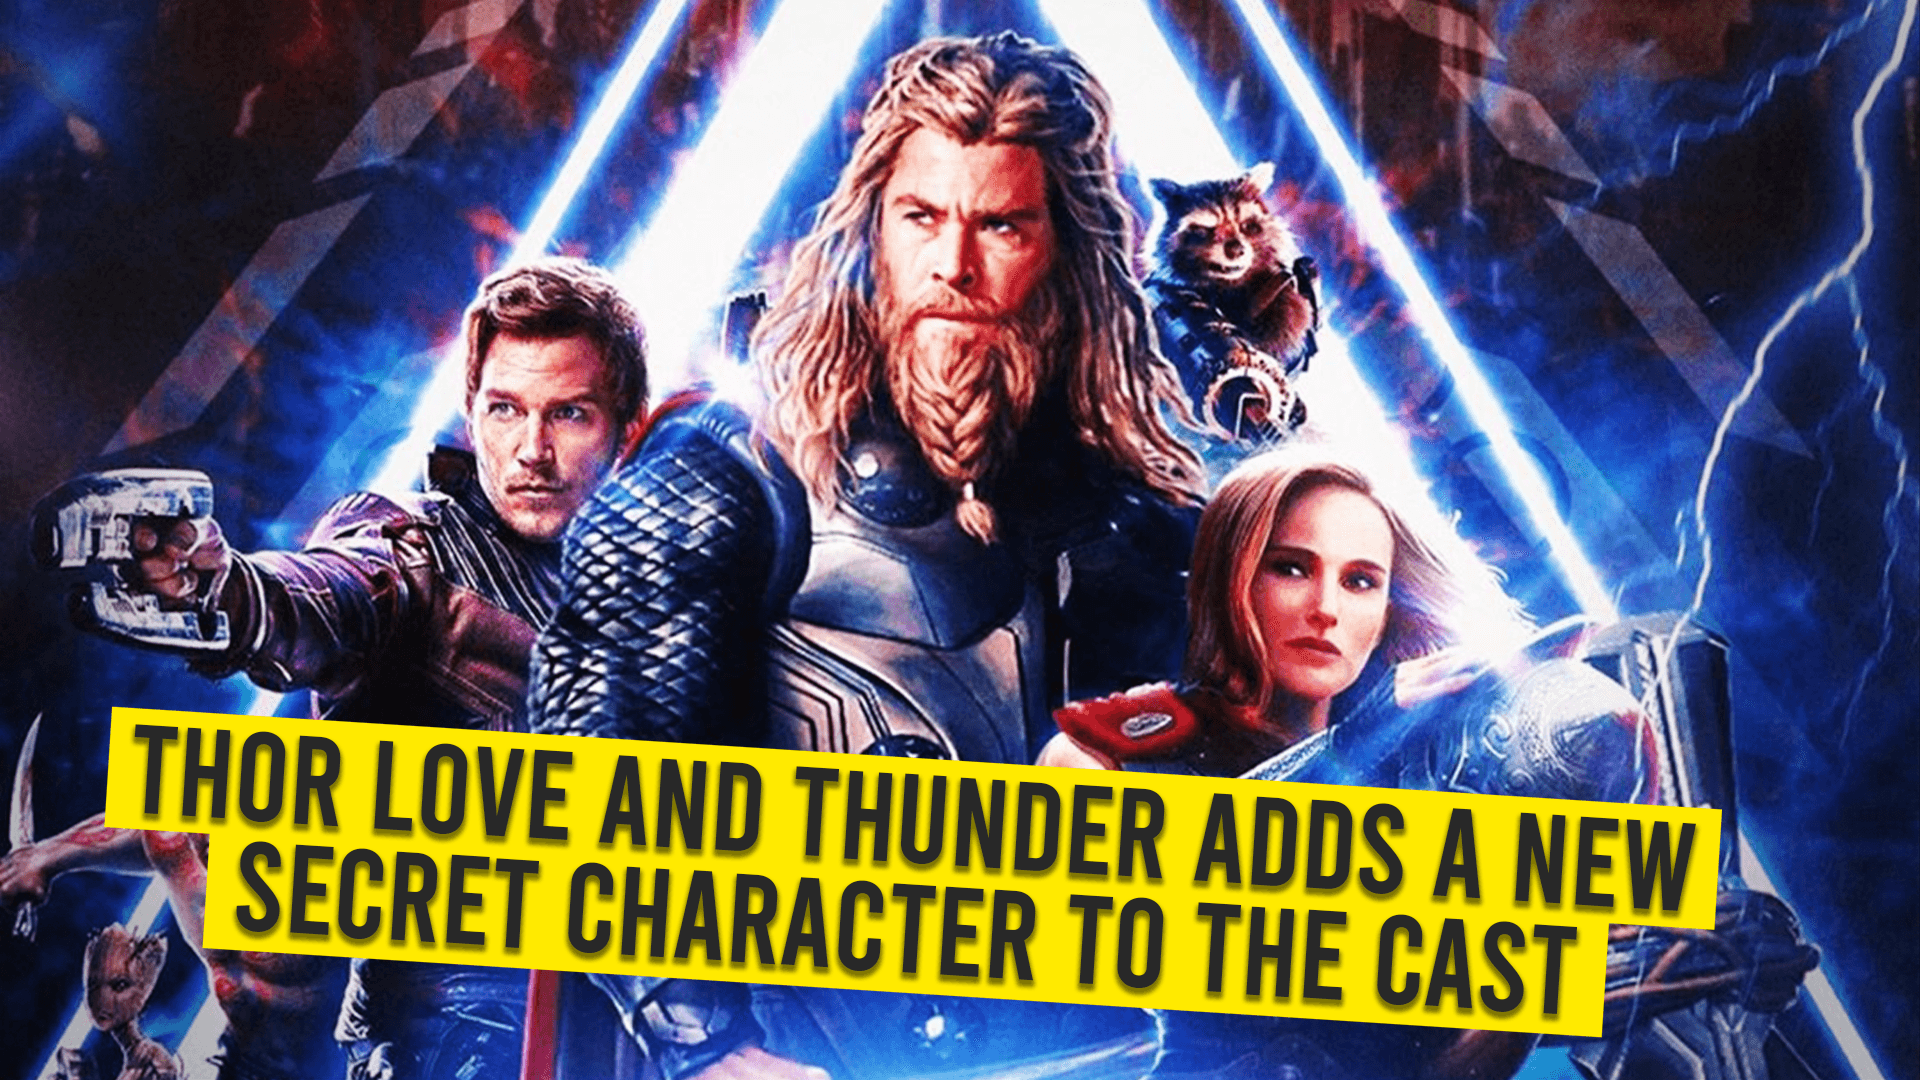 08 Thor Love And Thunder Adds A New Secret Character To The Cast